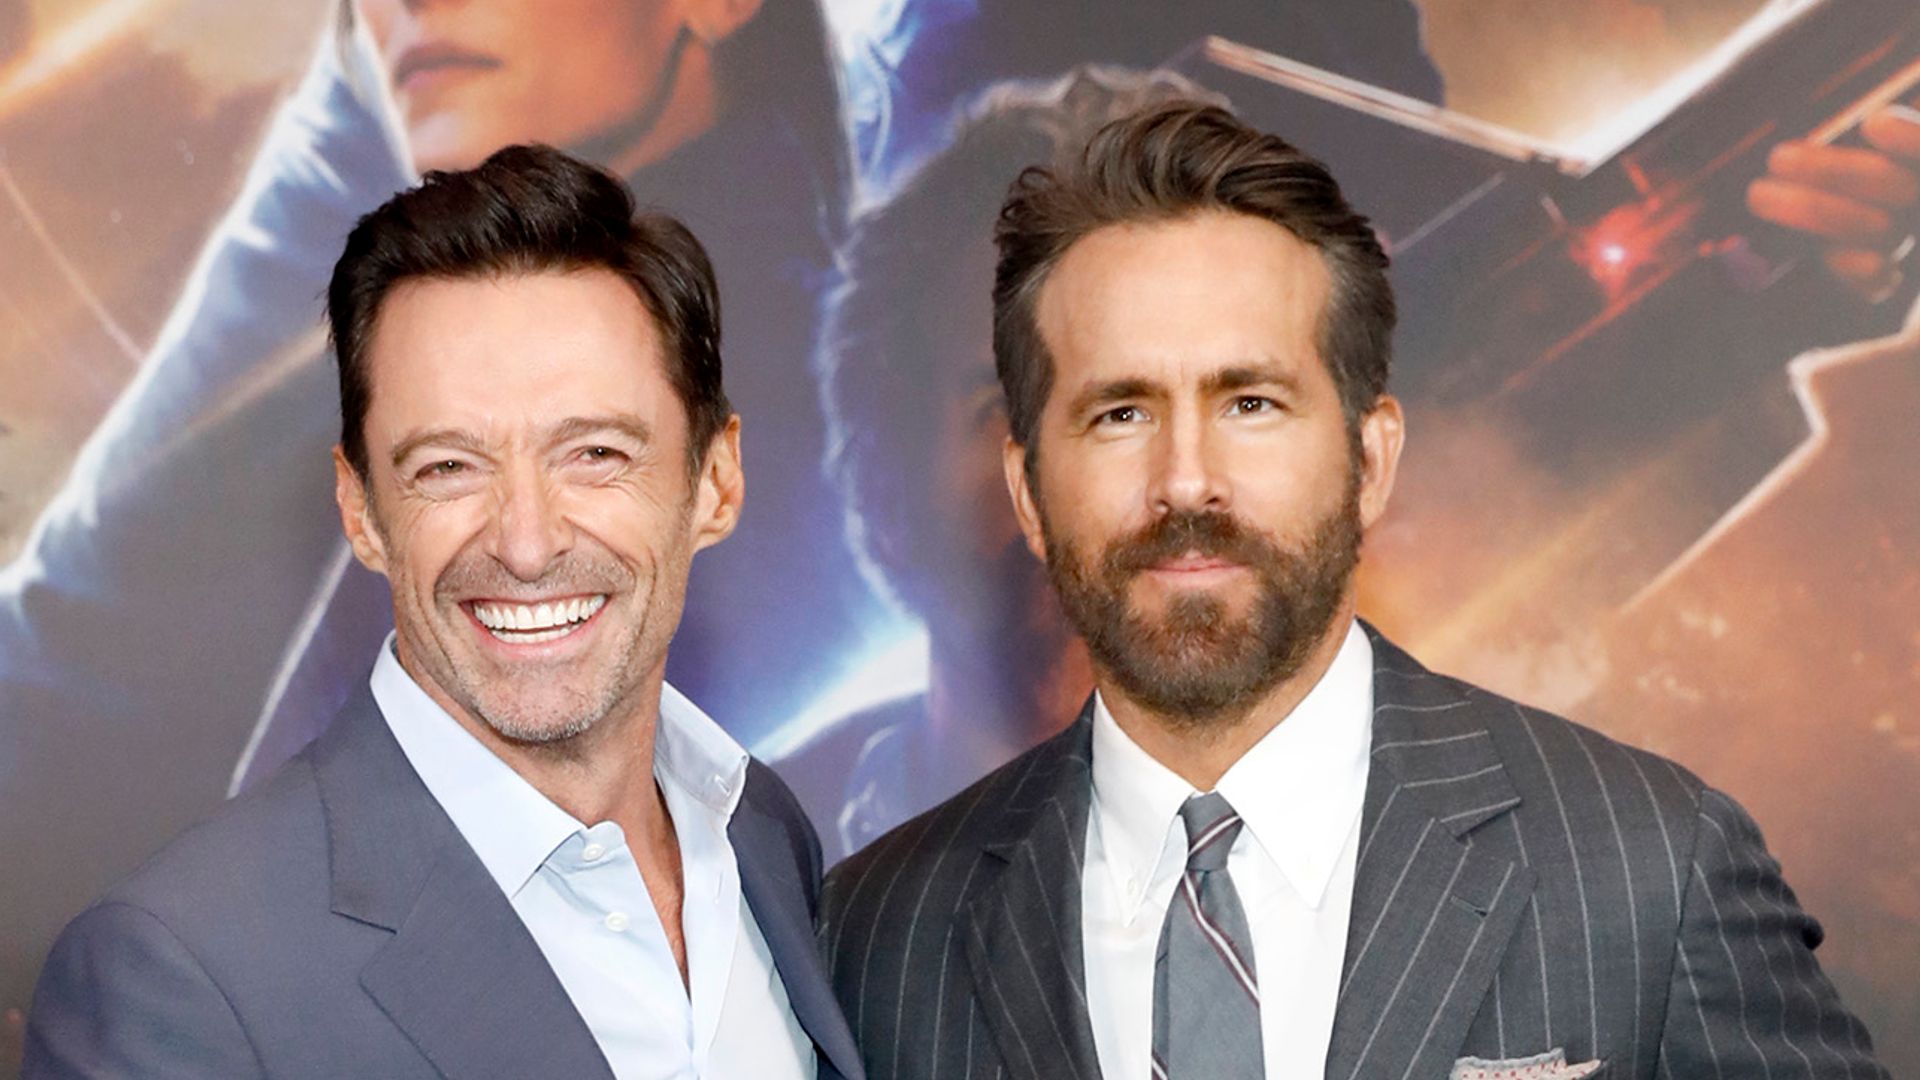 Hugh Jackman and Ryan Reynolds attend The Adam Project World Premiere at Alice Tully Hall on February 28, 2022 in New York City.